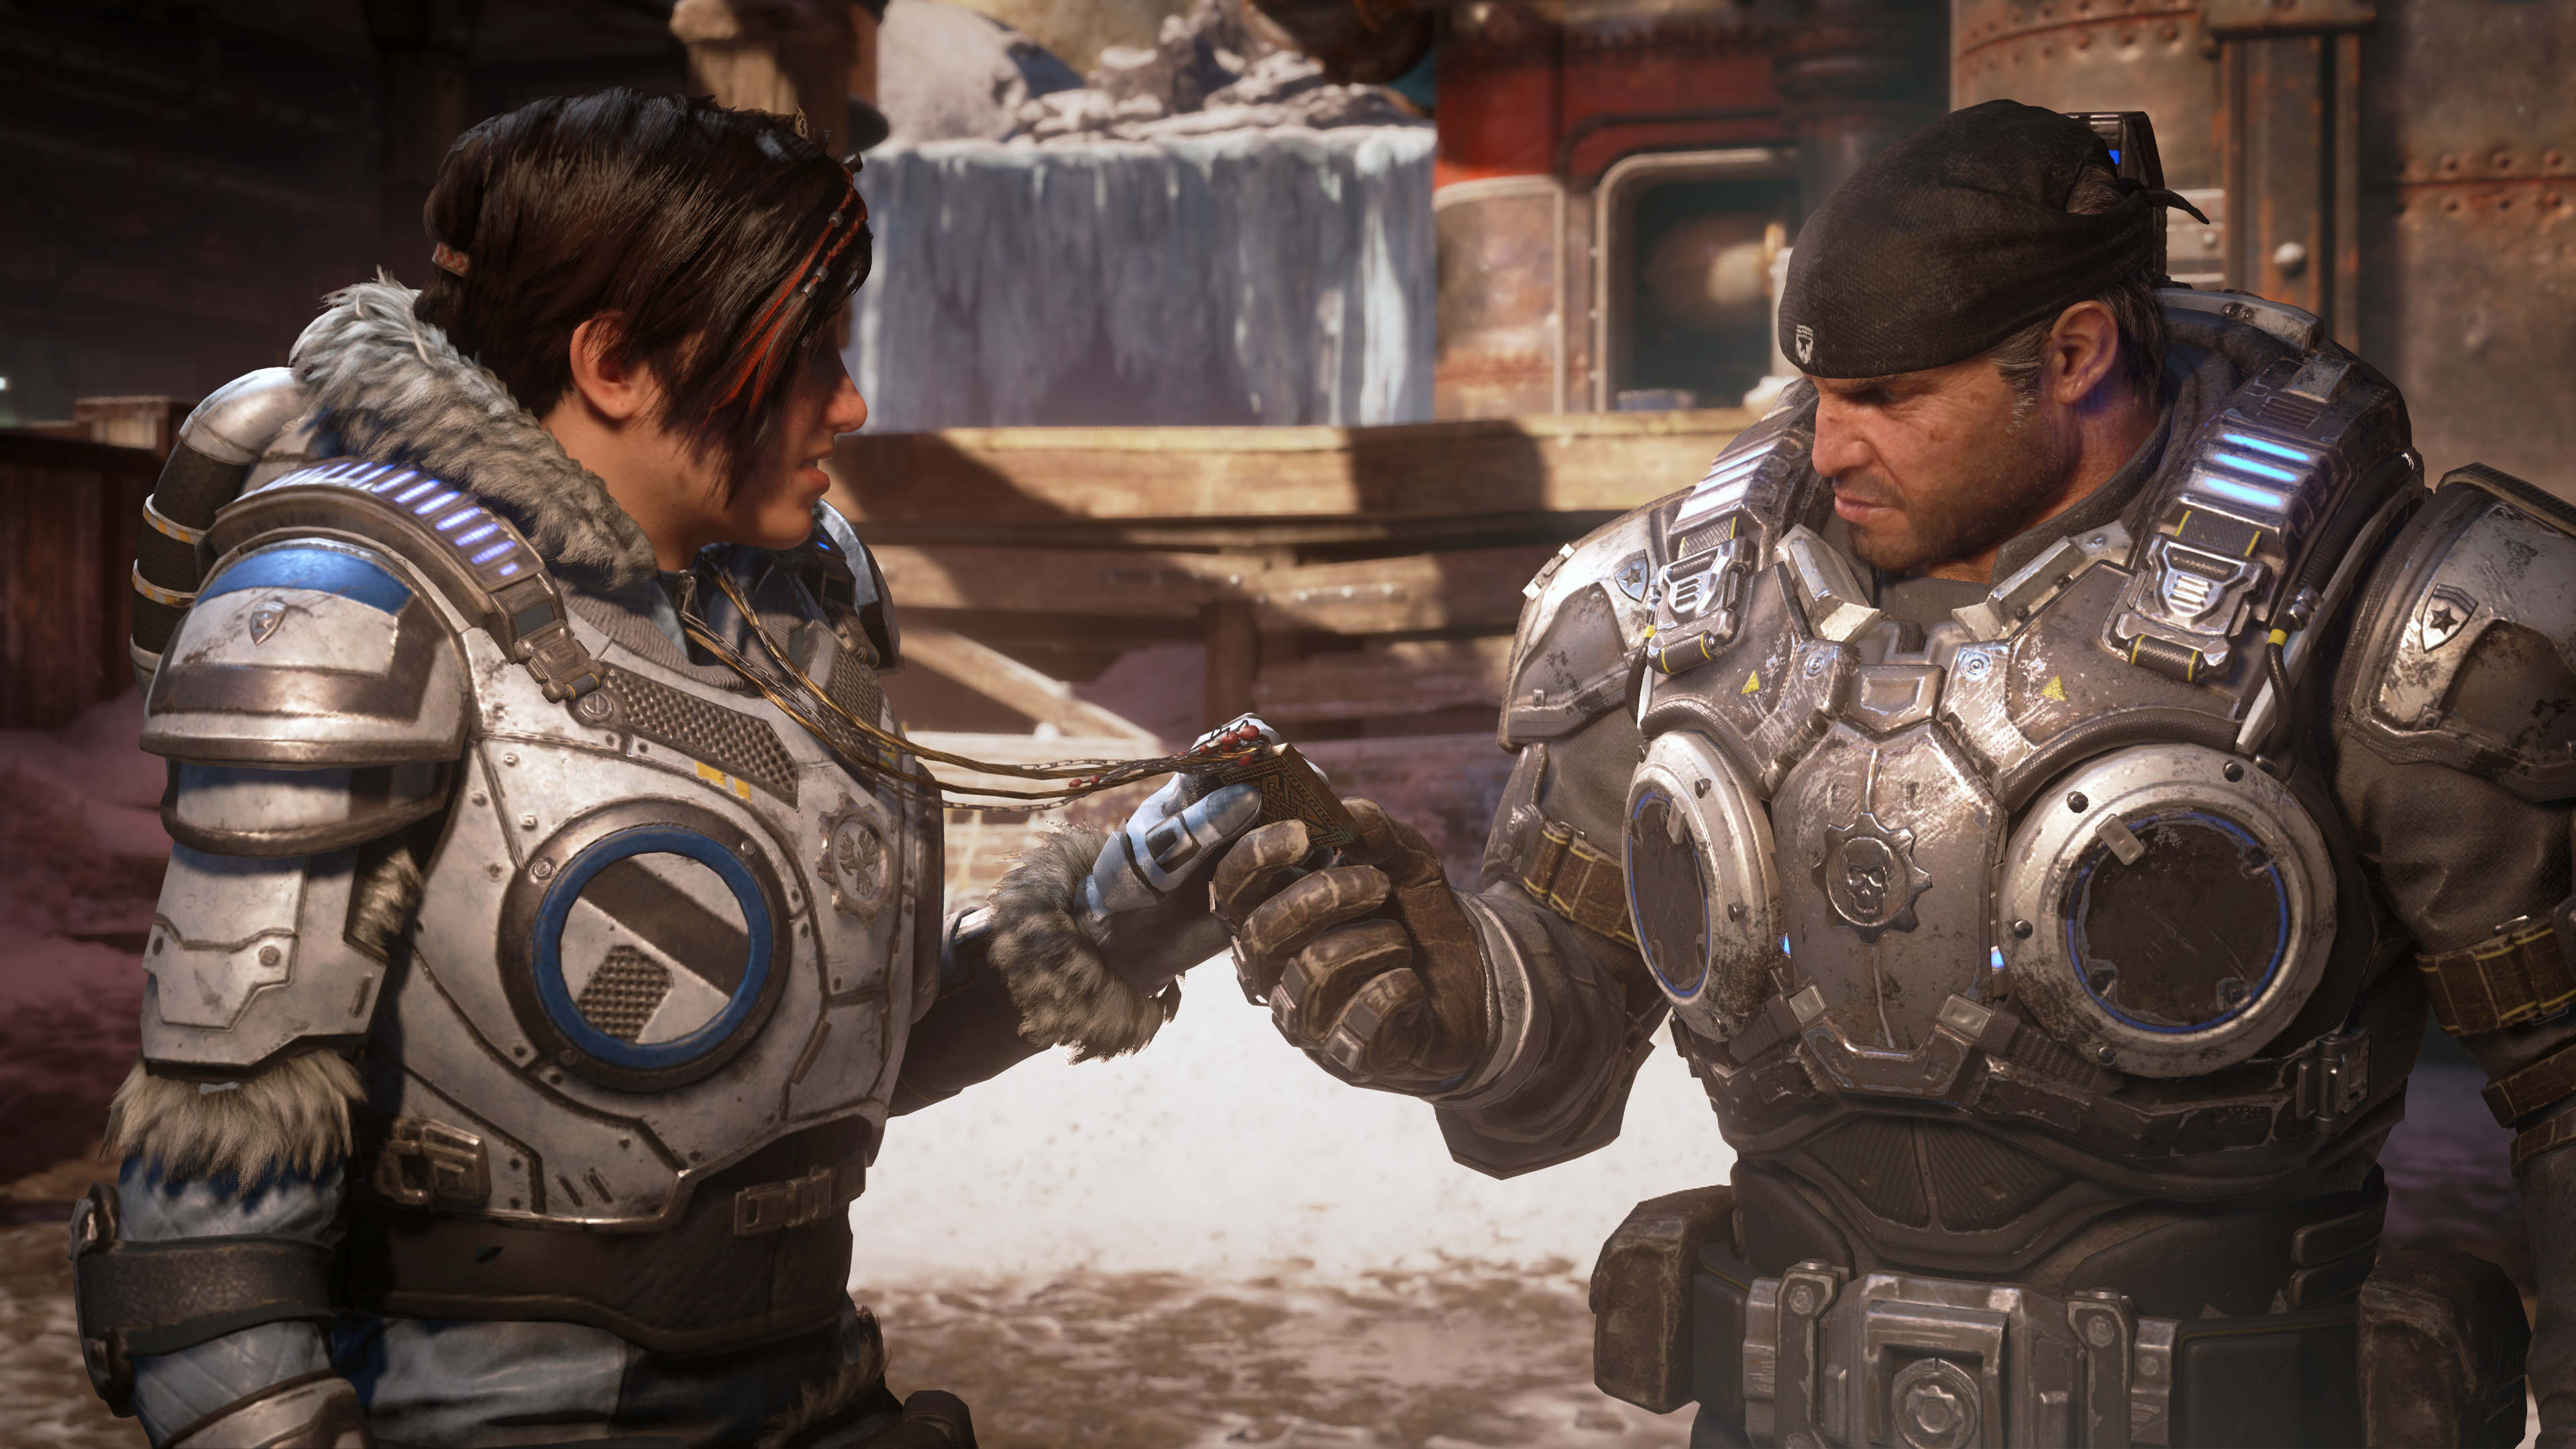 Gears 5 Cross Play Matchmaking Will Let Xbox Gamers Choose If They Want to  Play Against PC Players in Ranked Mode